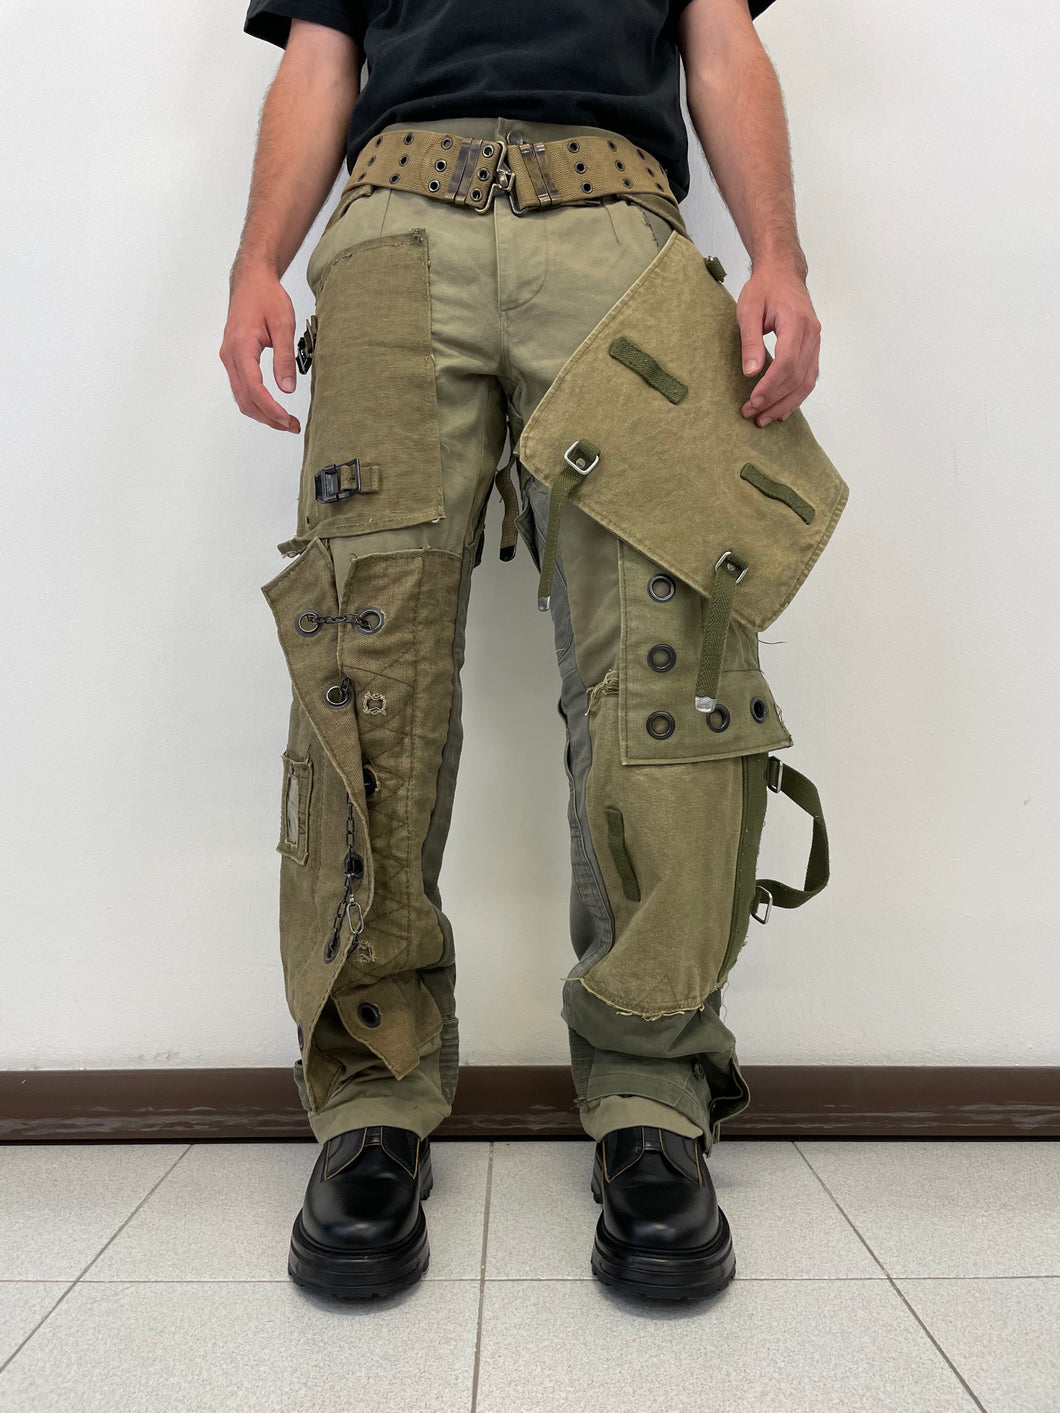 AW2003 Dolce & Gabbana military reconstructed pants